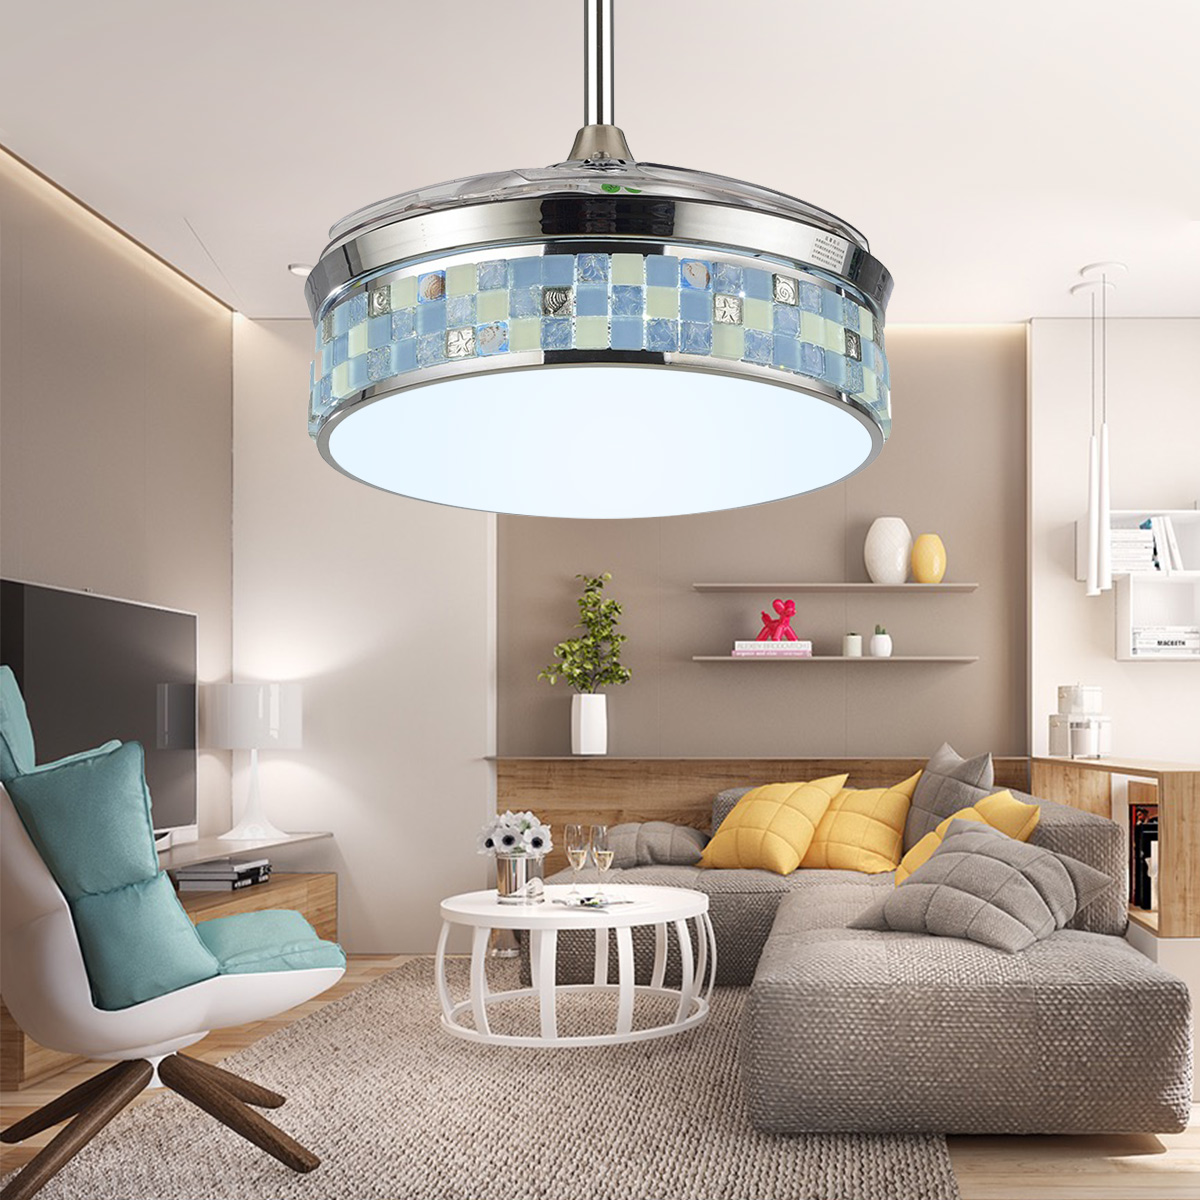 Details About 42 Modern Ceiling Fan Light Led Dimmable Remote Control Retractable Blade Lamp